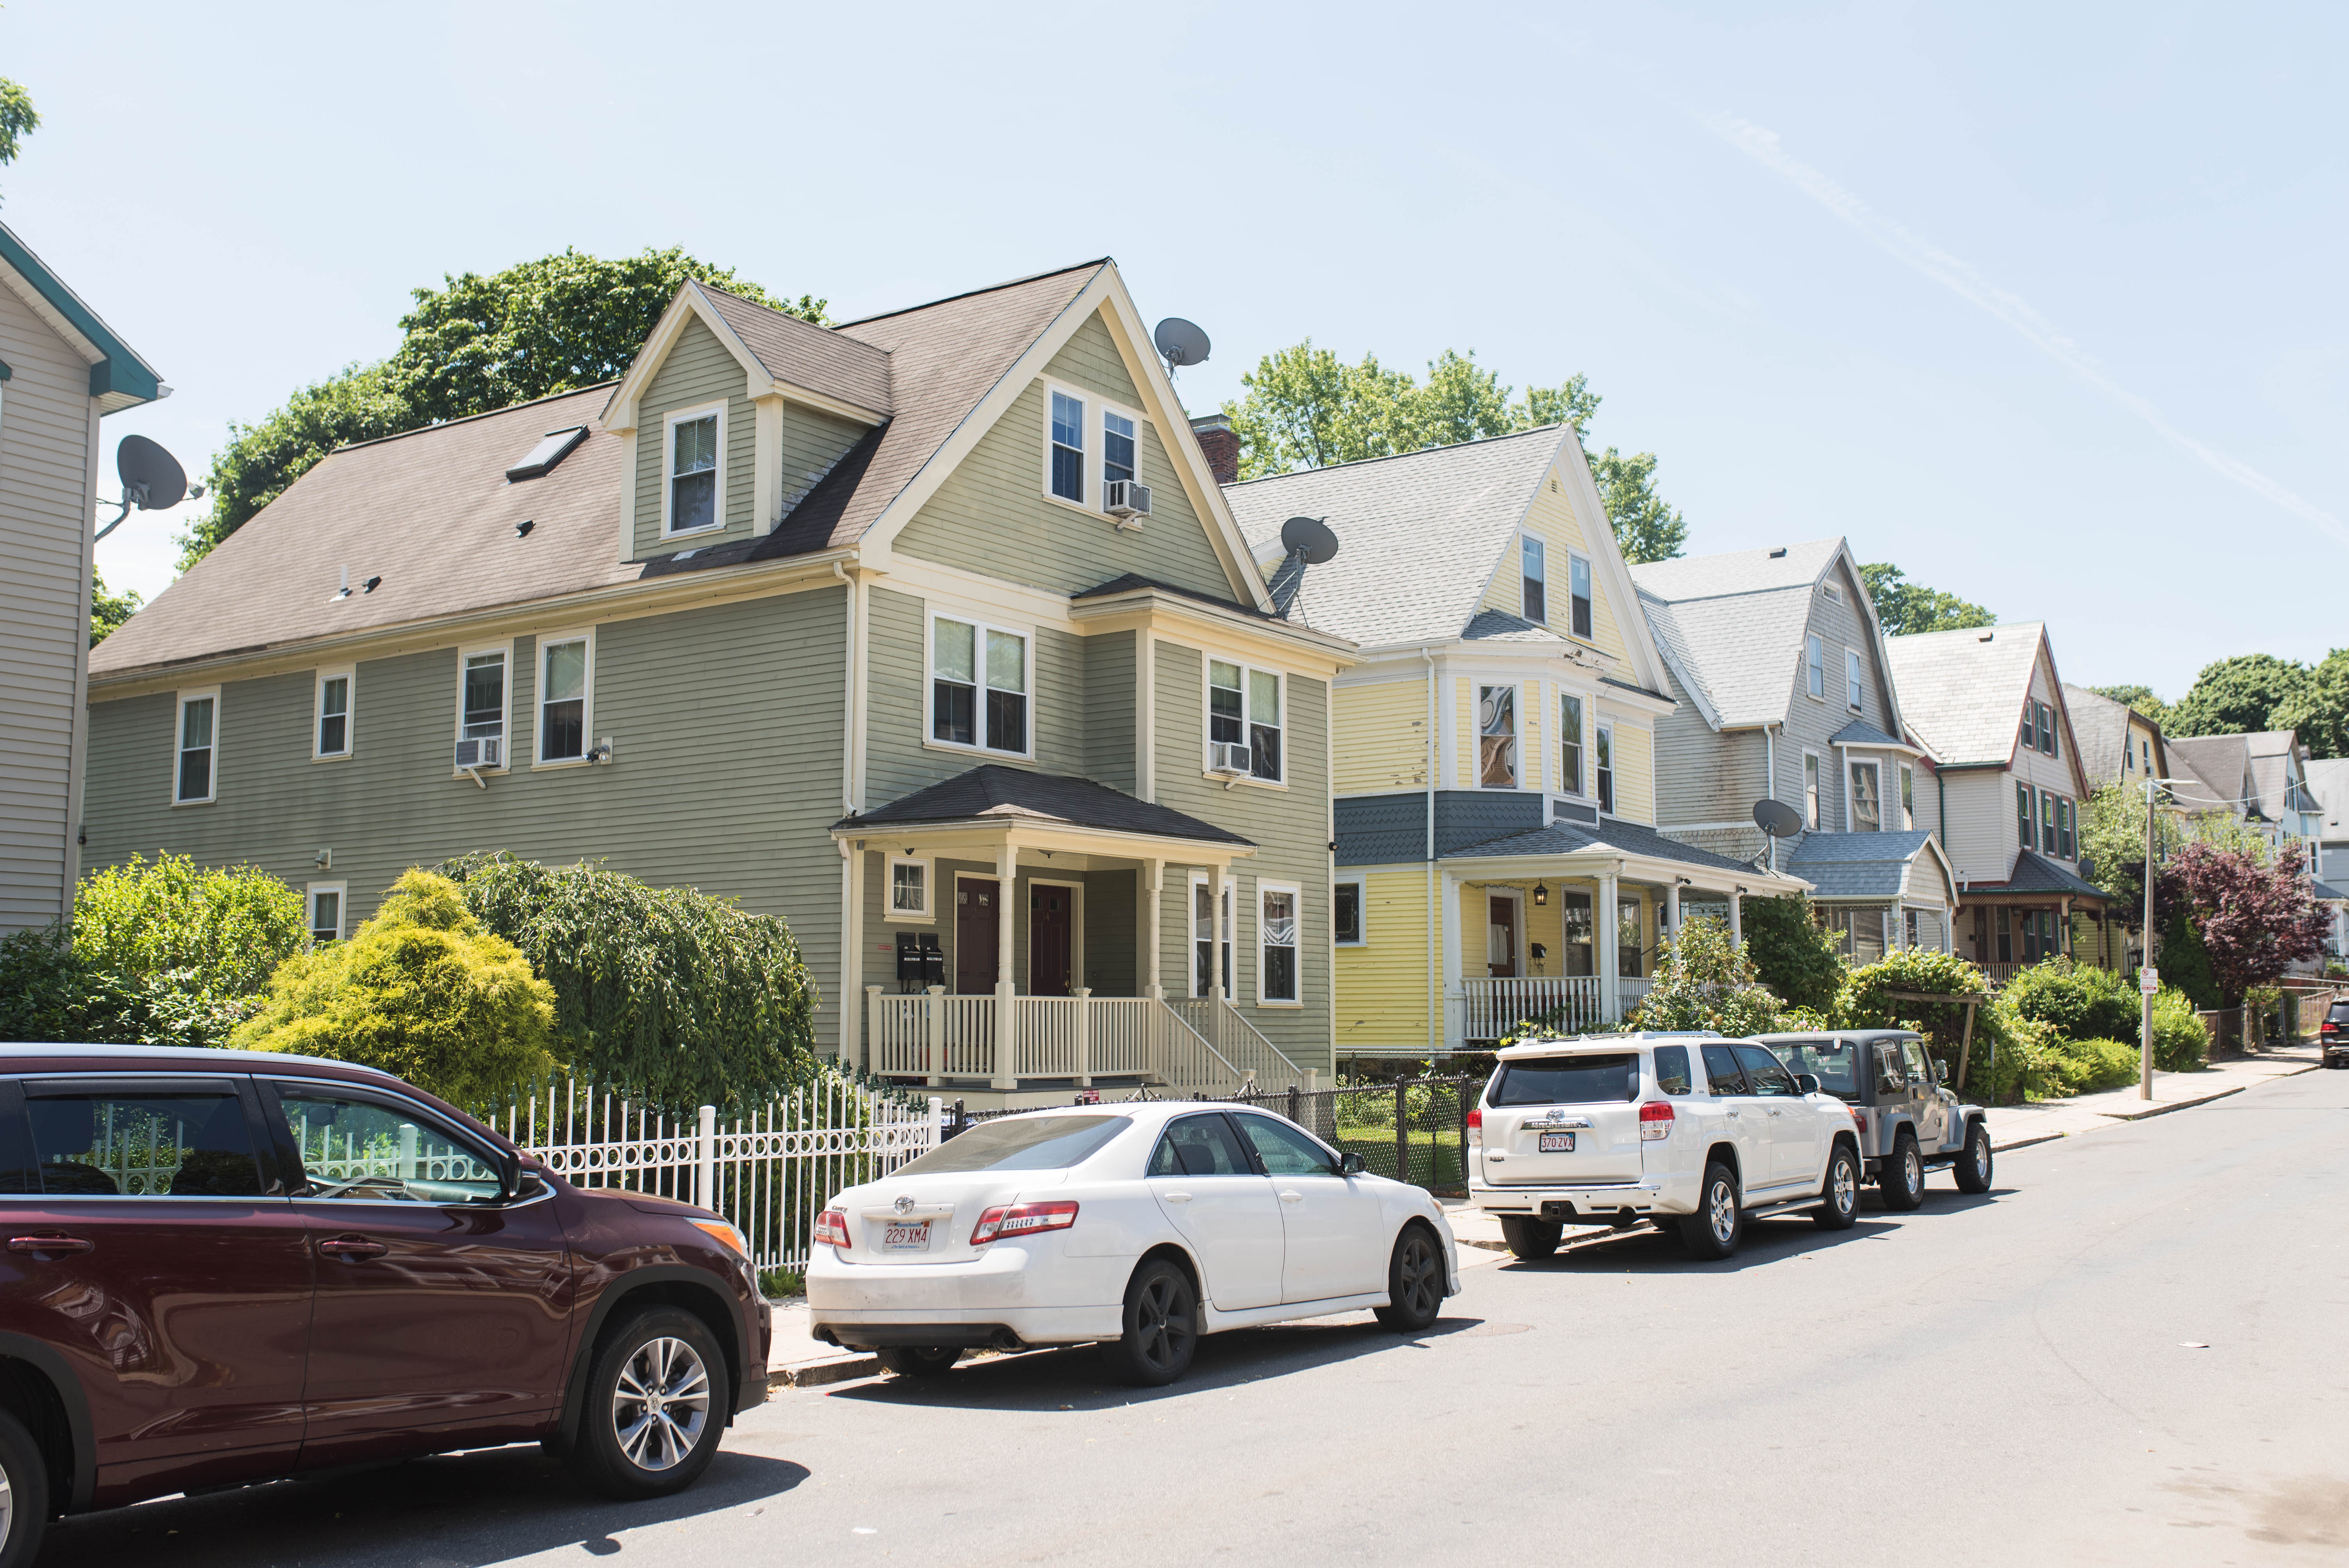 A row of two- and three-story houses along a city street with cars parked in front.